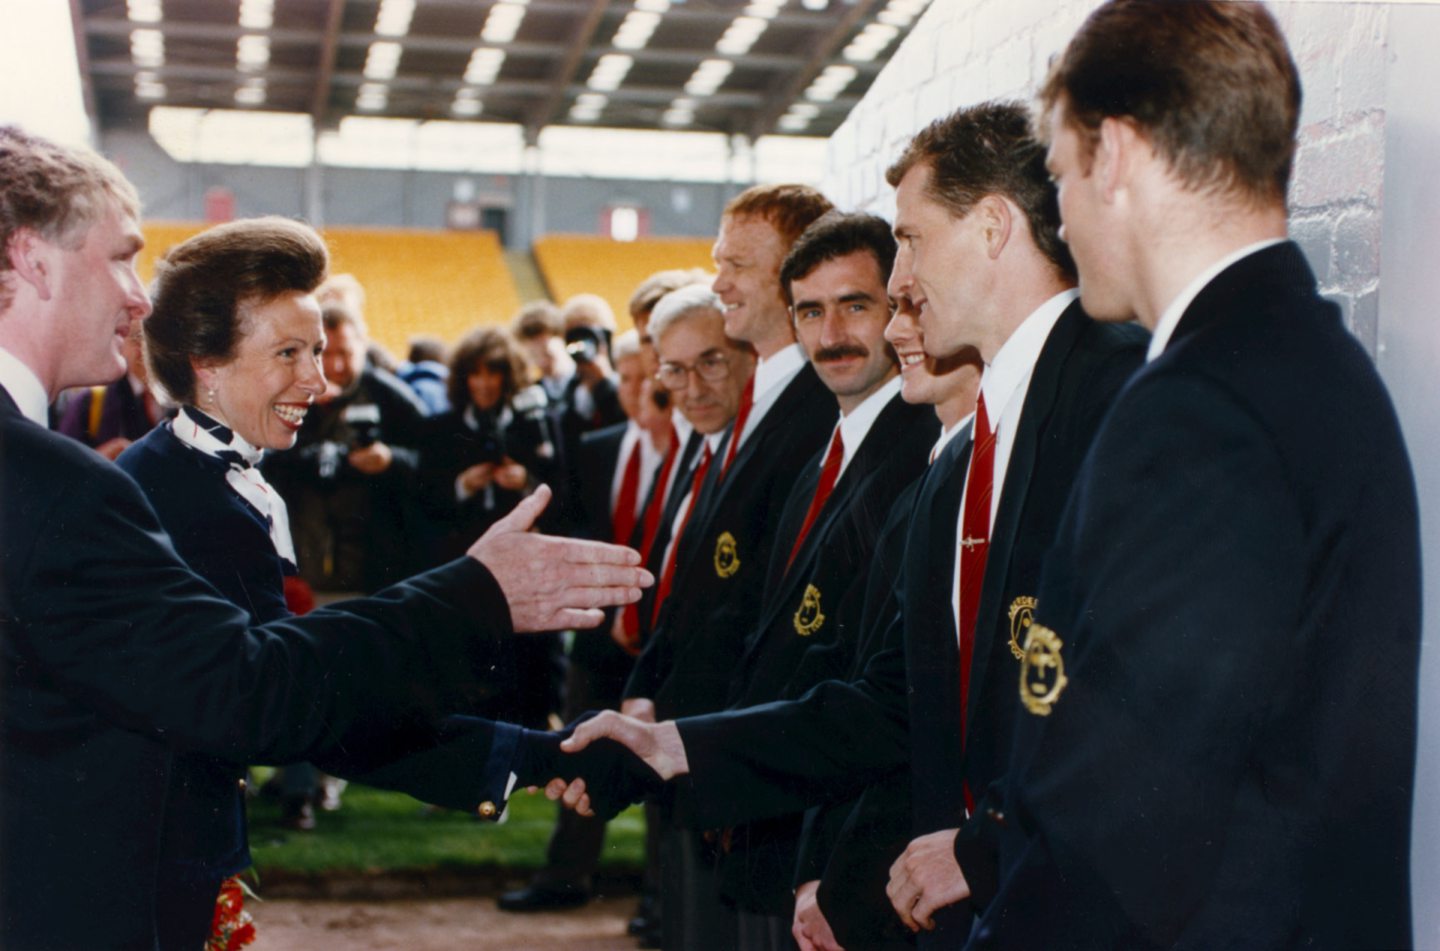 The Princess Royal was highly amused when she opened the  Richard Donald stand at Pittodrie in 1993. Here she meets Dons defender Brian Irvine as Aberdeen FC vice-chairman Ian Donald introduces her to the staff and players.